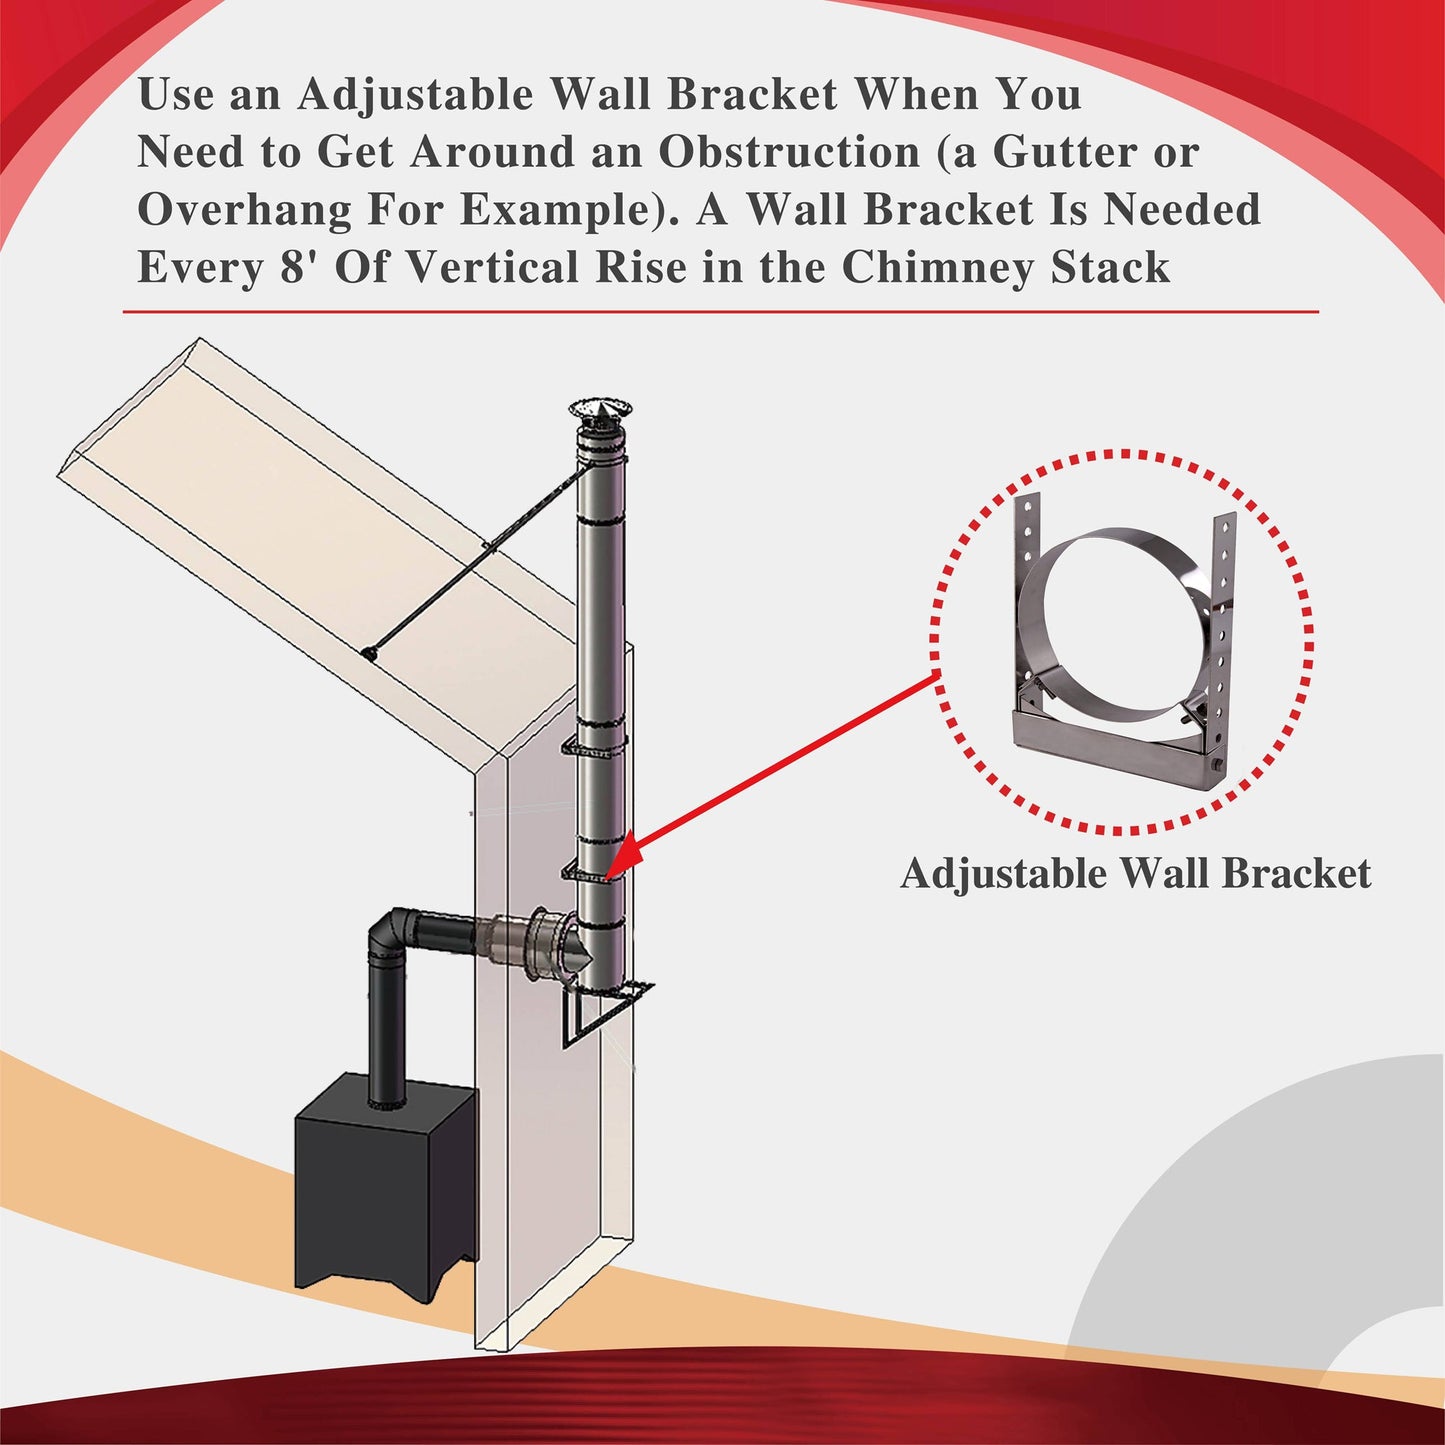 Adjustable Wall Bracket for 6" Double Wall Chimney Pipe